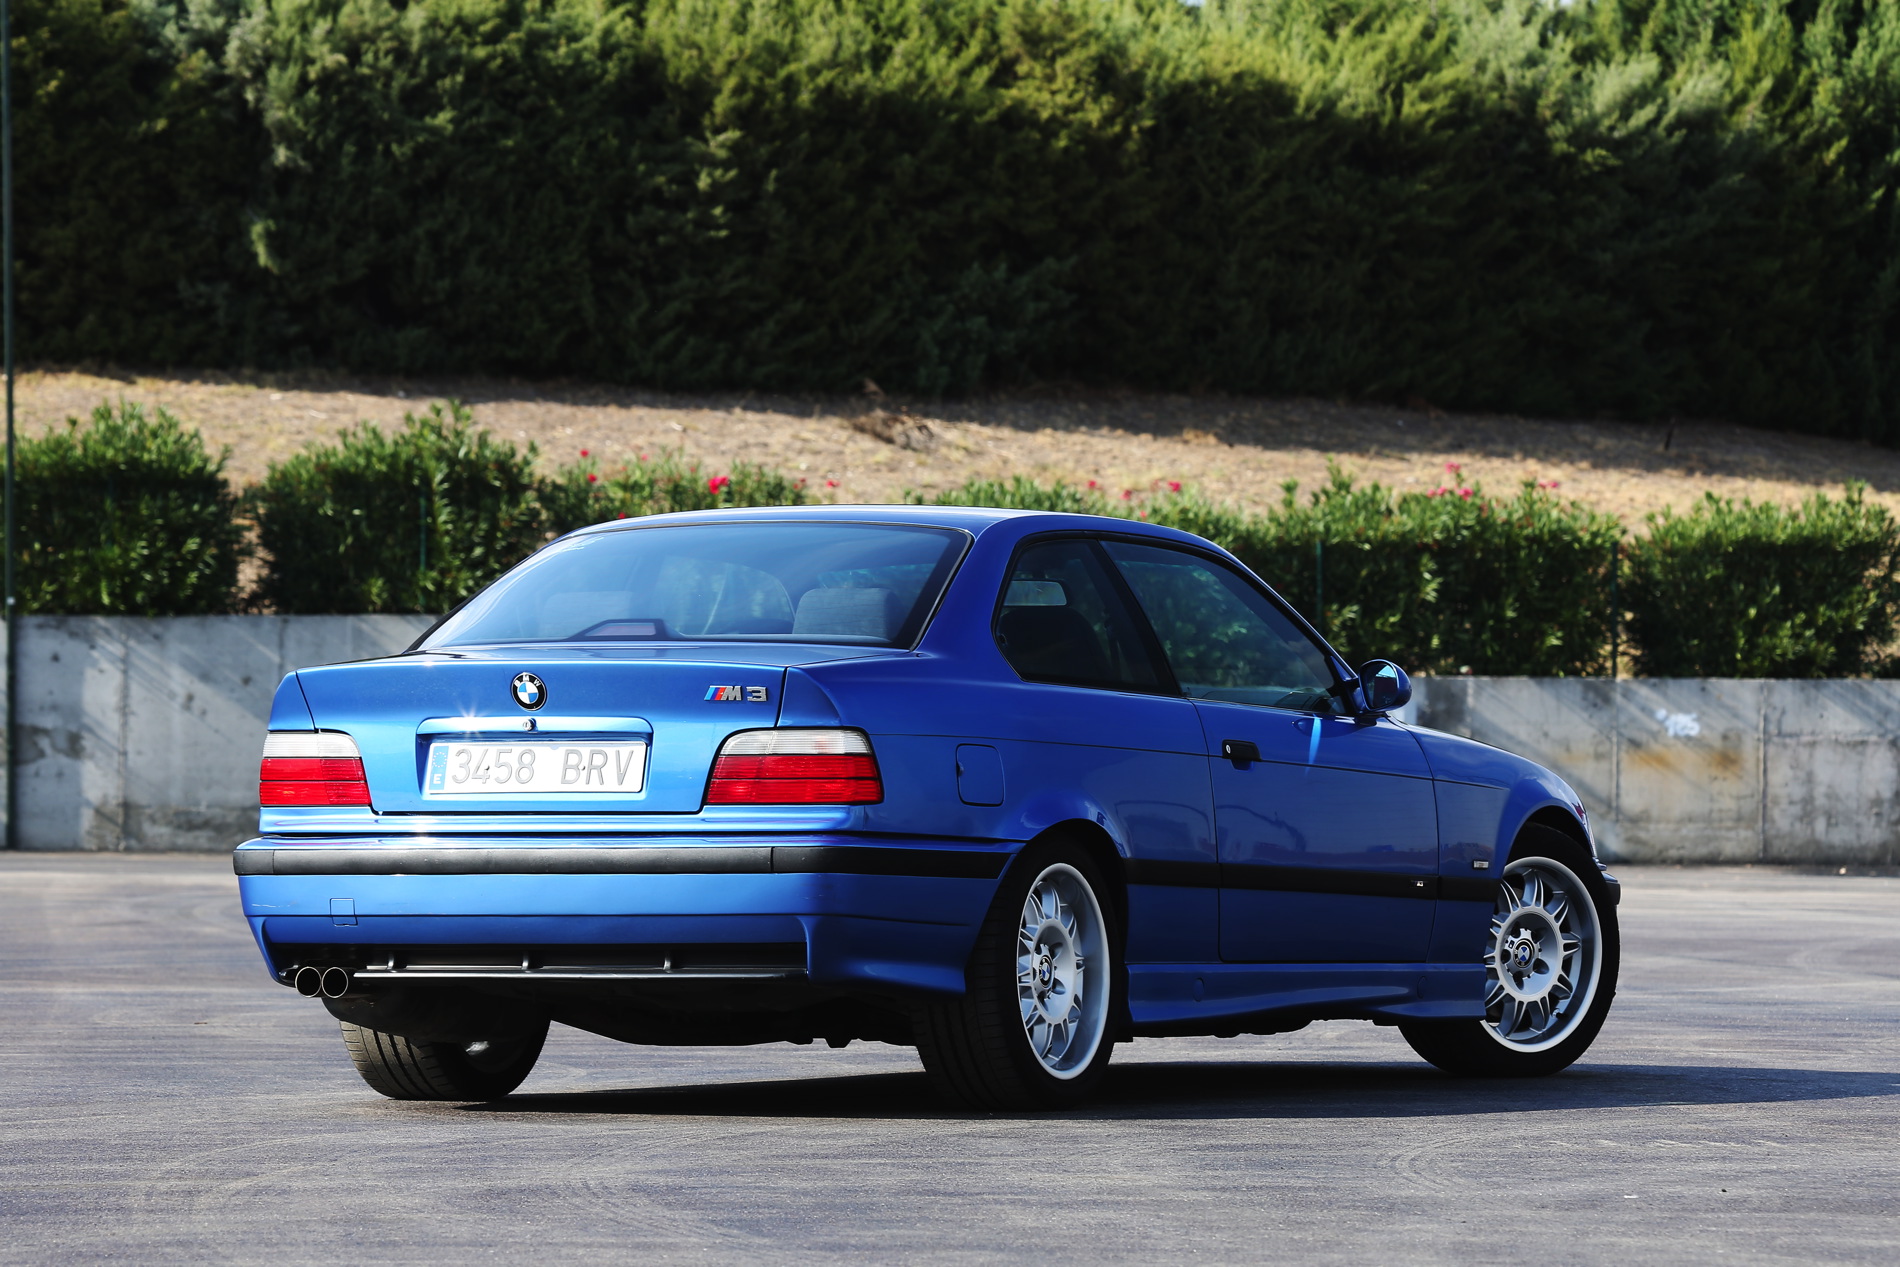 The E36 M3 was not just “another BMW” Cars and News